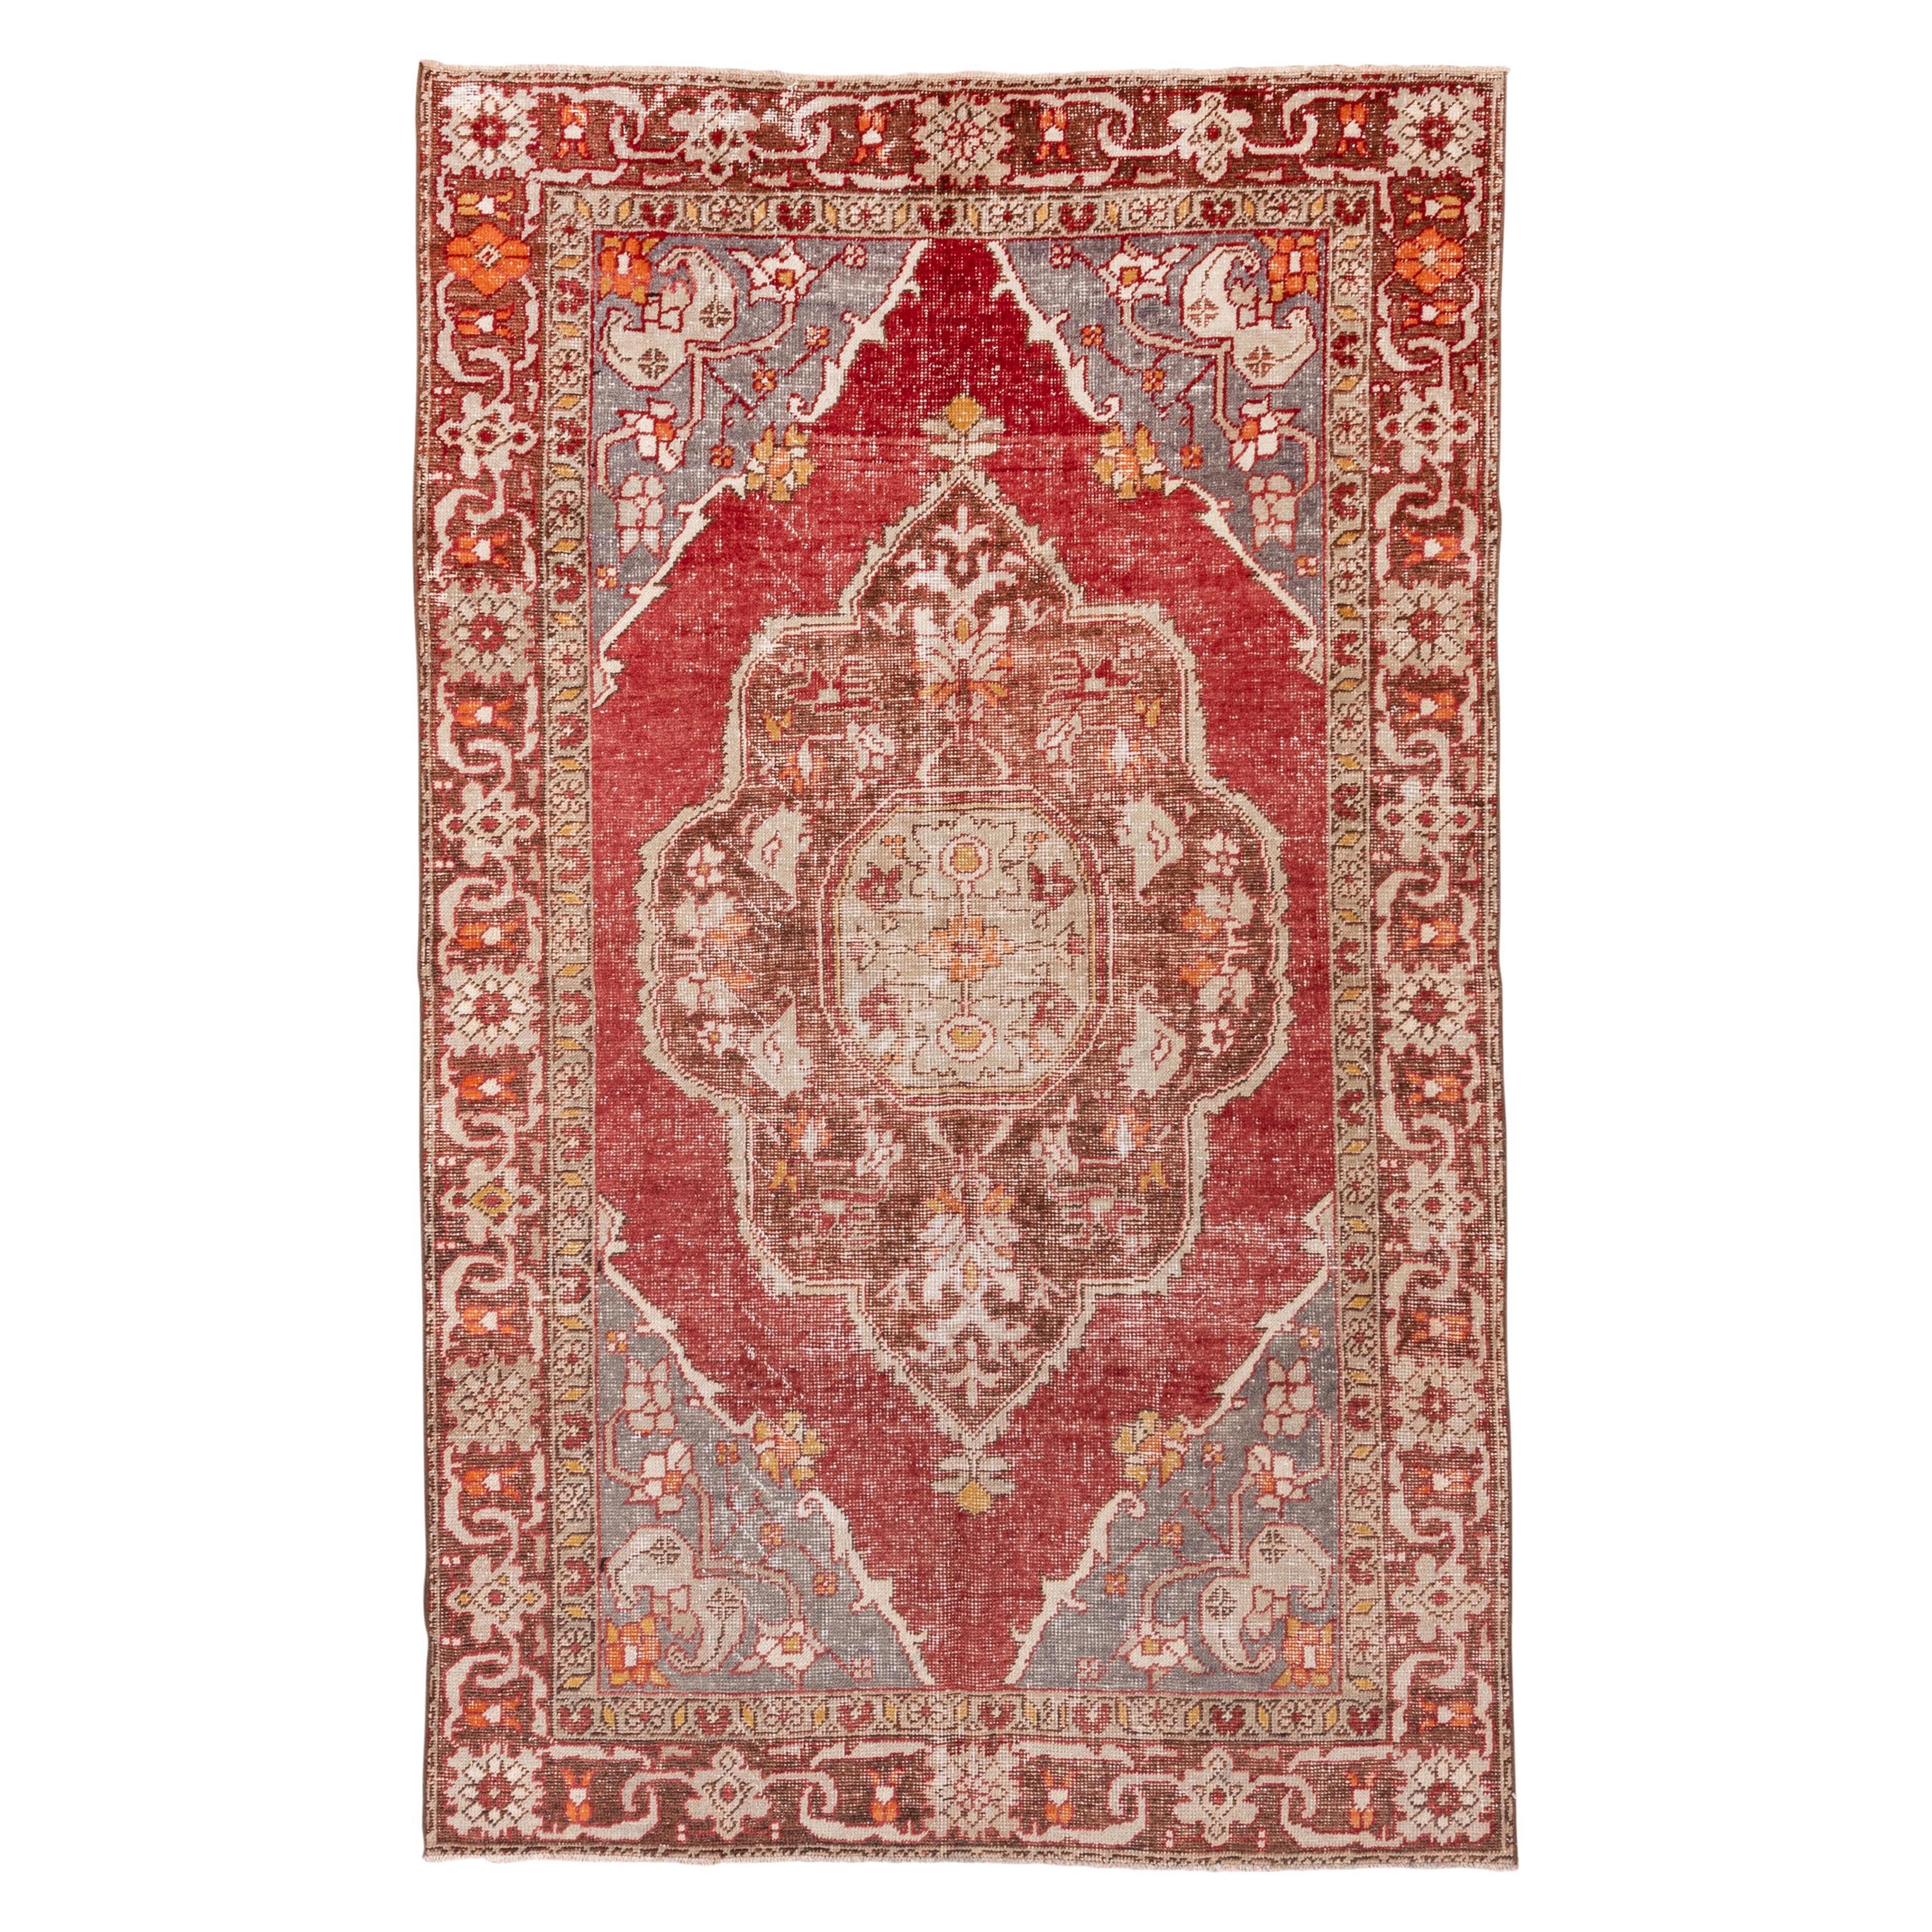 Antique Turkish Oushak Rug, Red, Gray and Brown Field, Even Wear